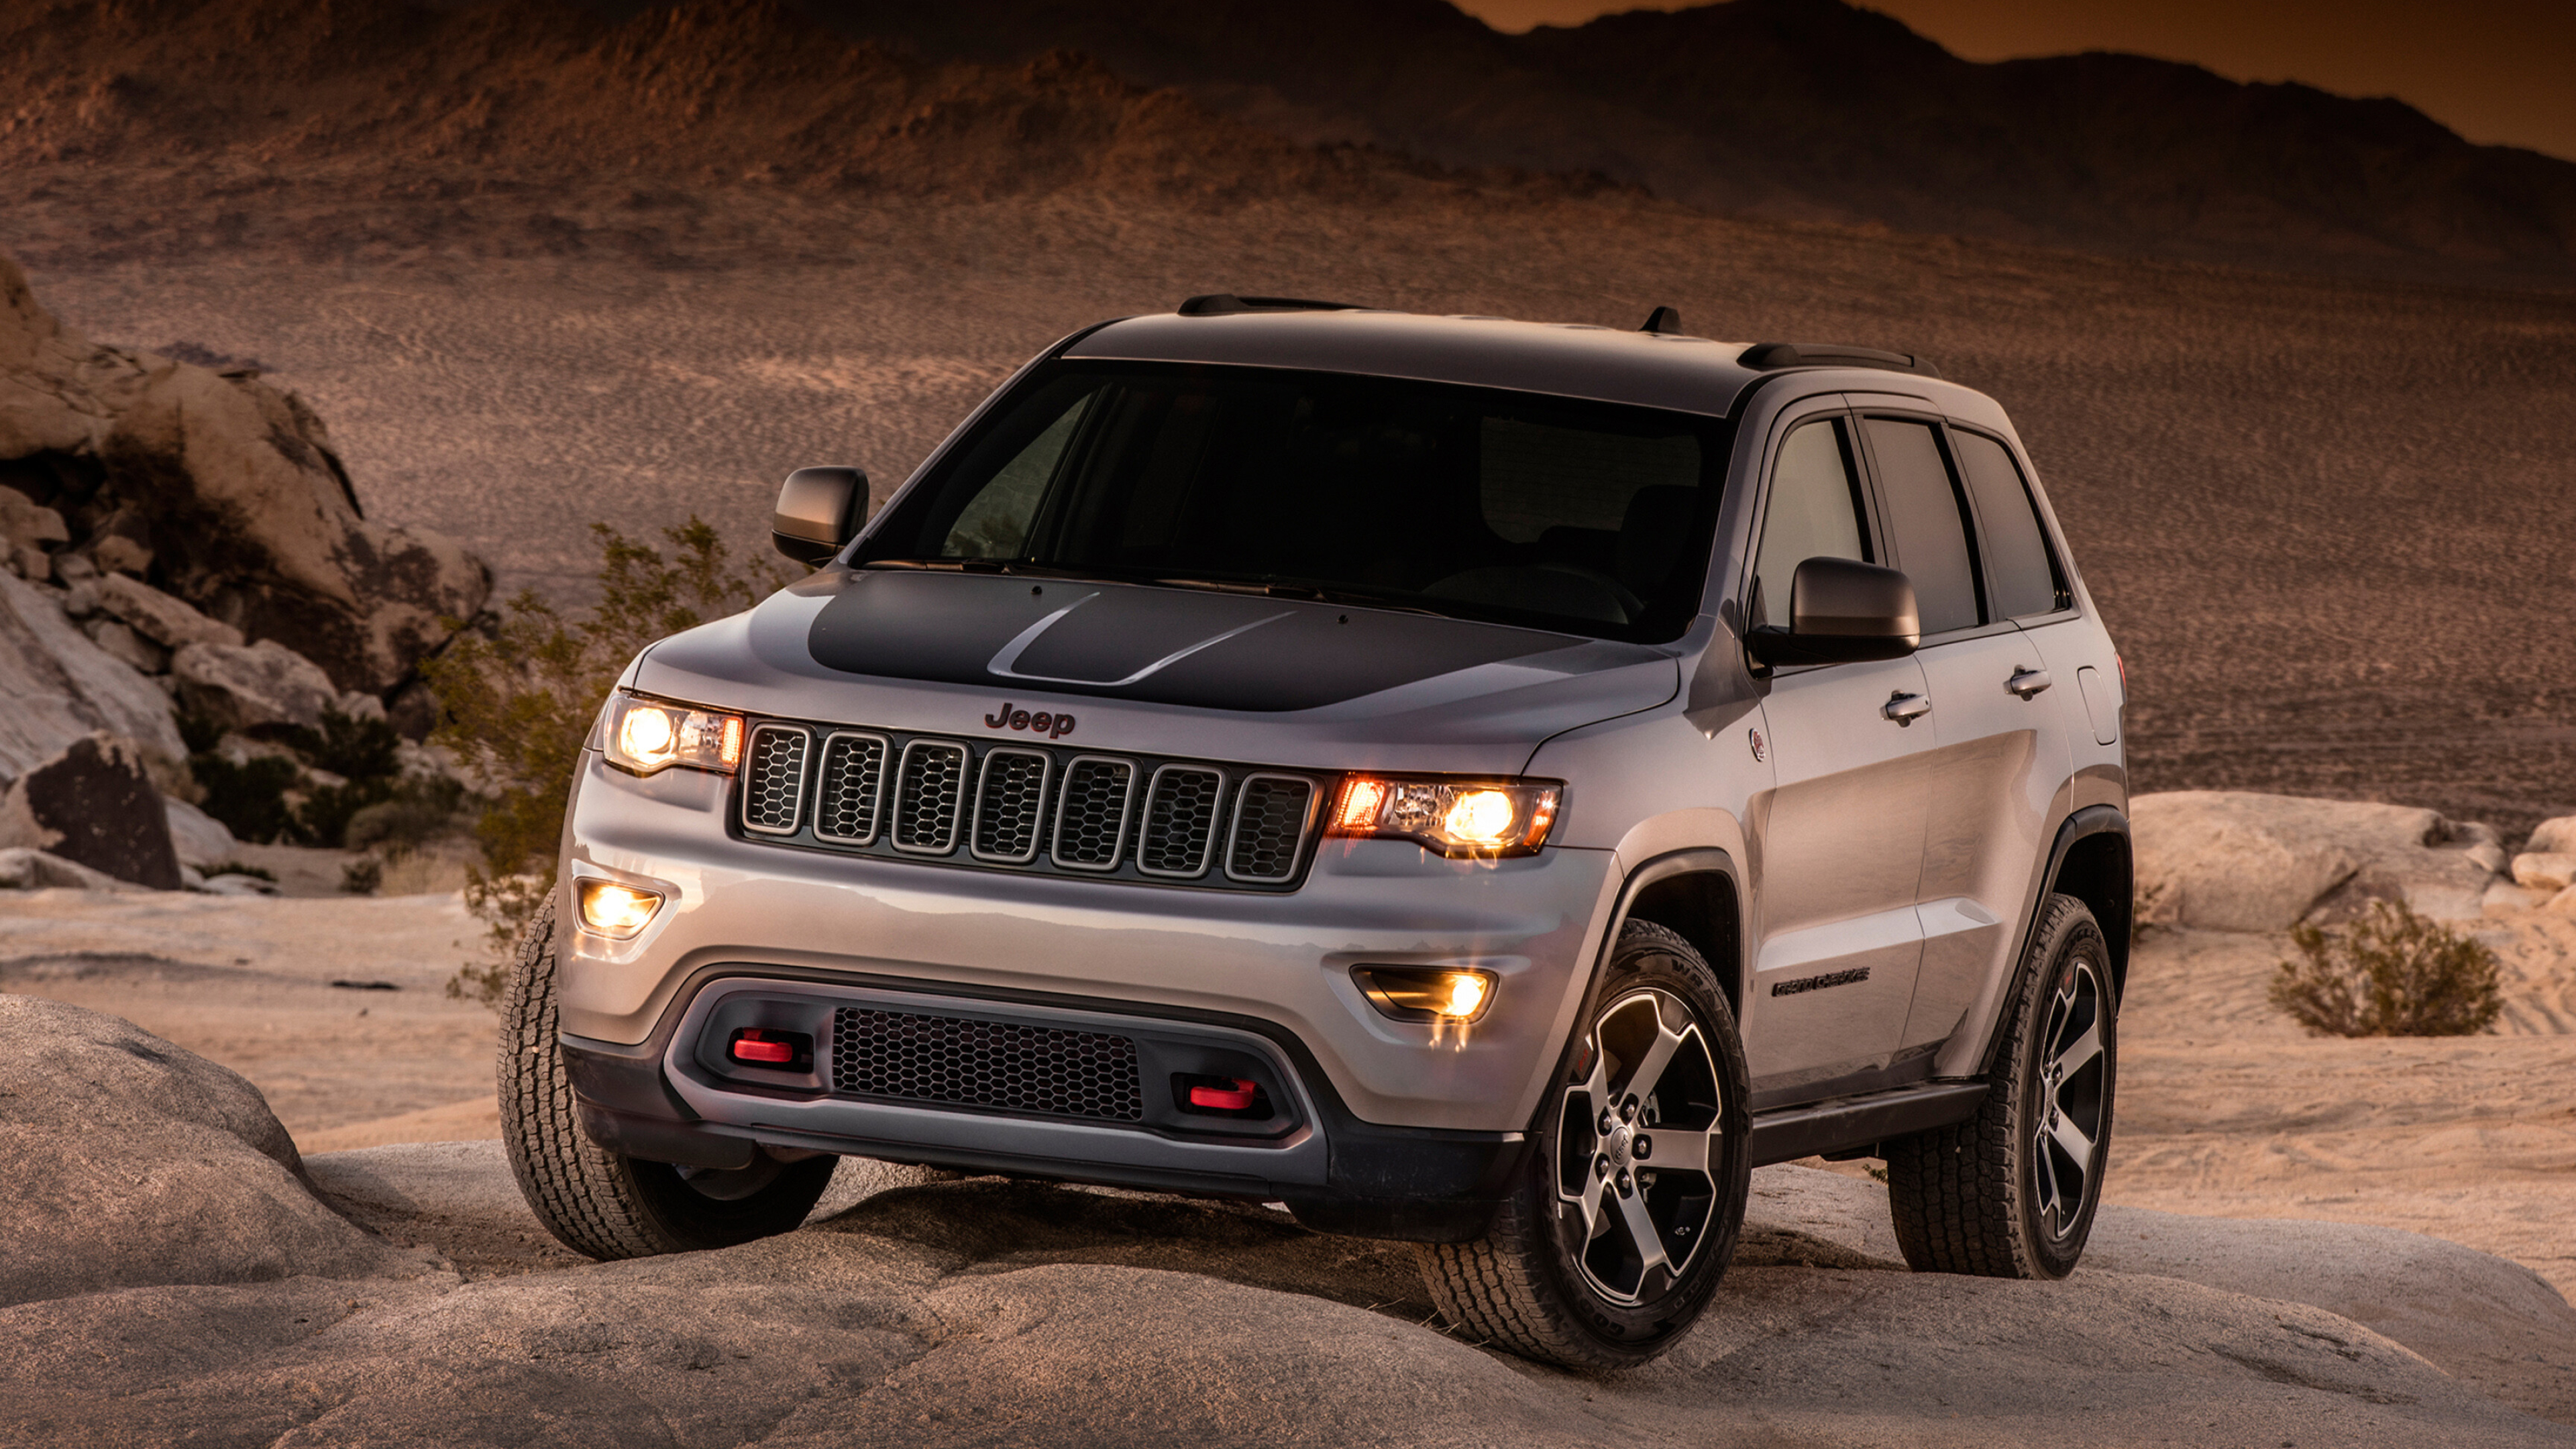 Jeep Grand Cherokee: Popular full-size truck, Off-roading, SUV. 3840x2160 4K Background.